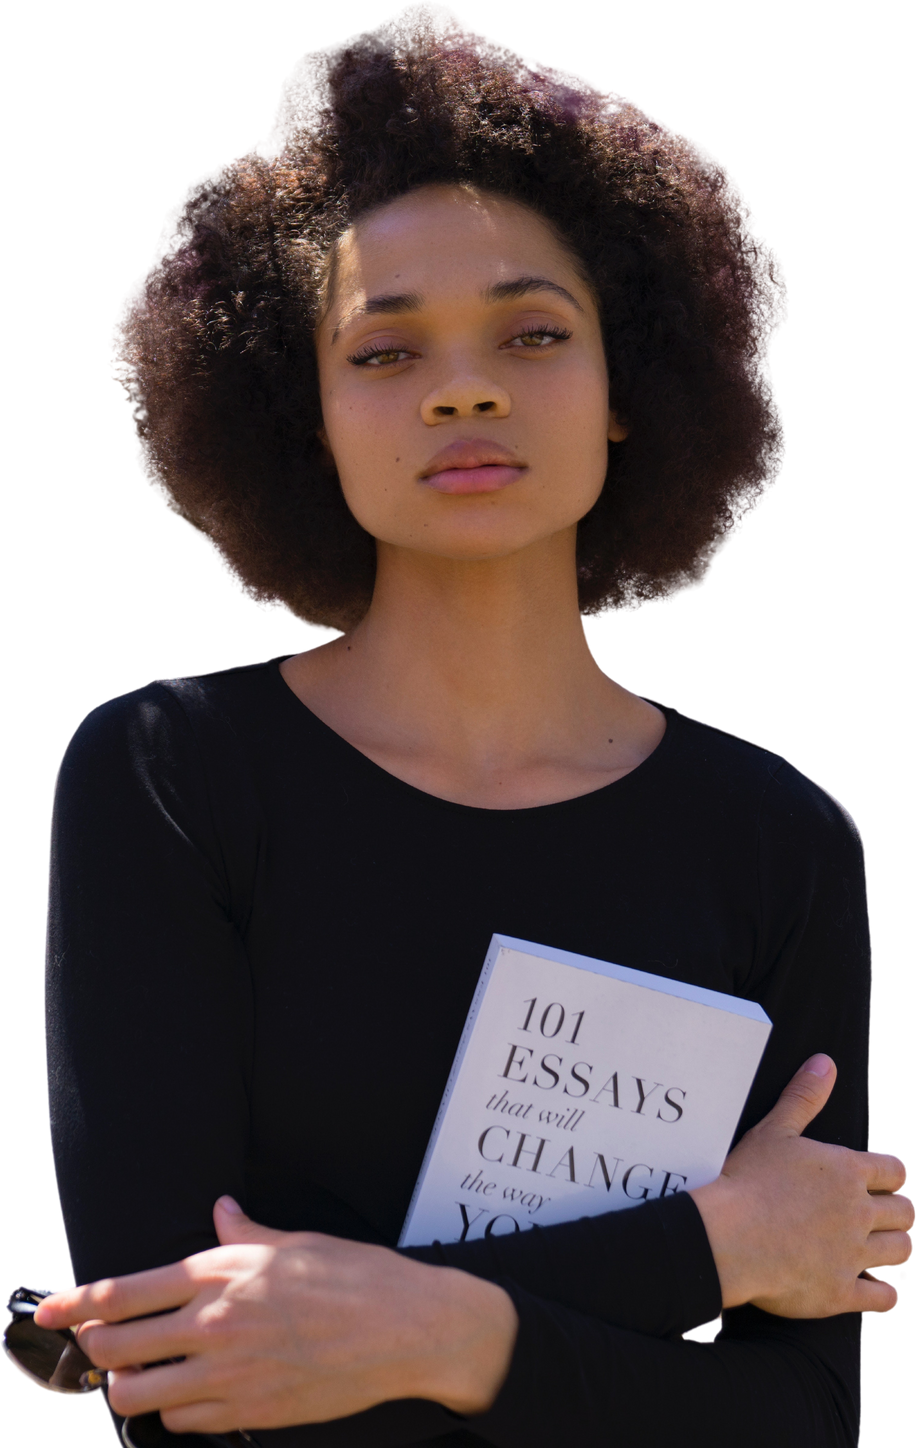 A woman with an afro is holding a book in her hands